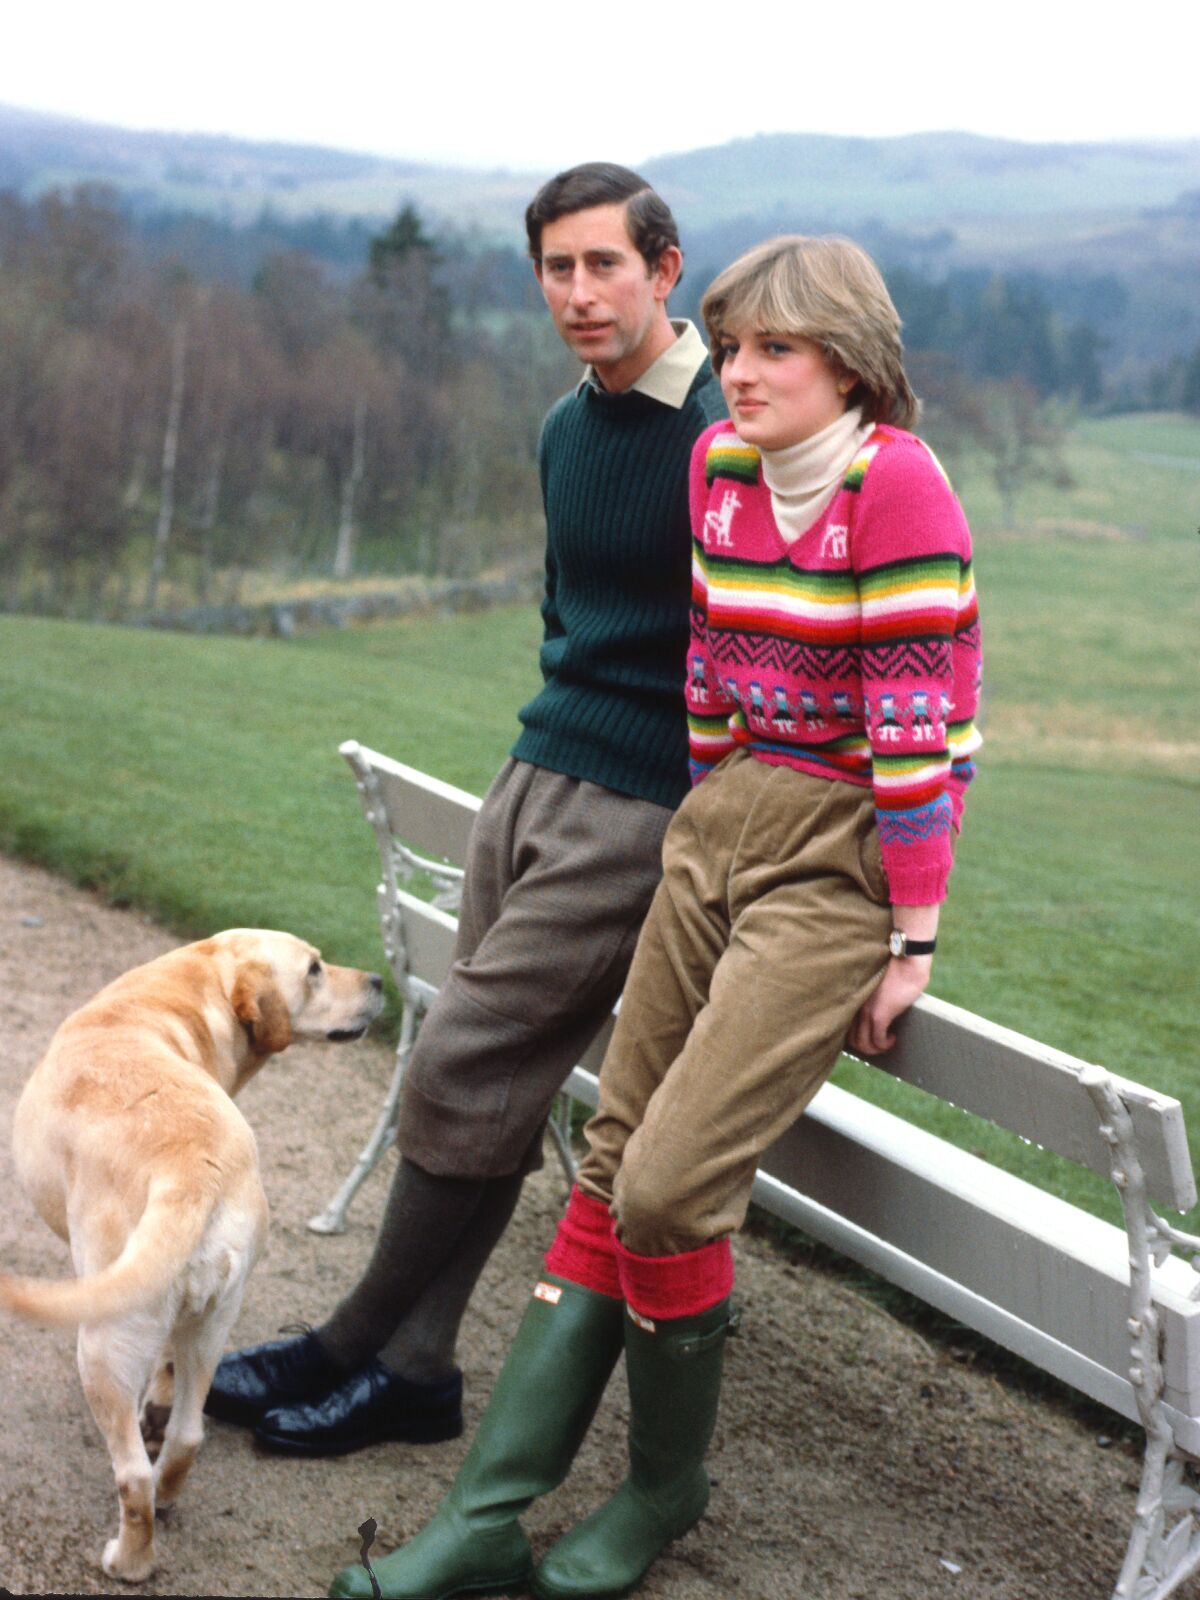 May 1981: Prince Charles and fiancee Lady Diana Spencer at Balmoral. She wears a colorful Peruvian sweater and Wellingtons.